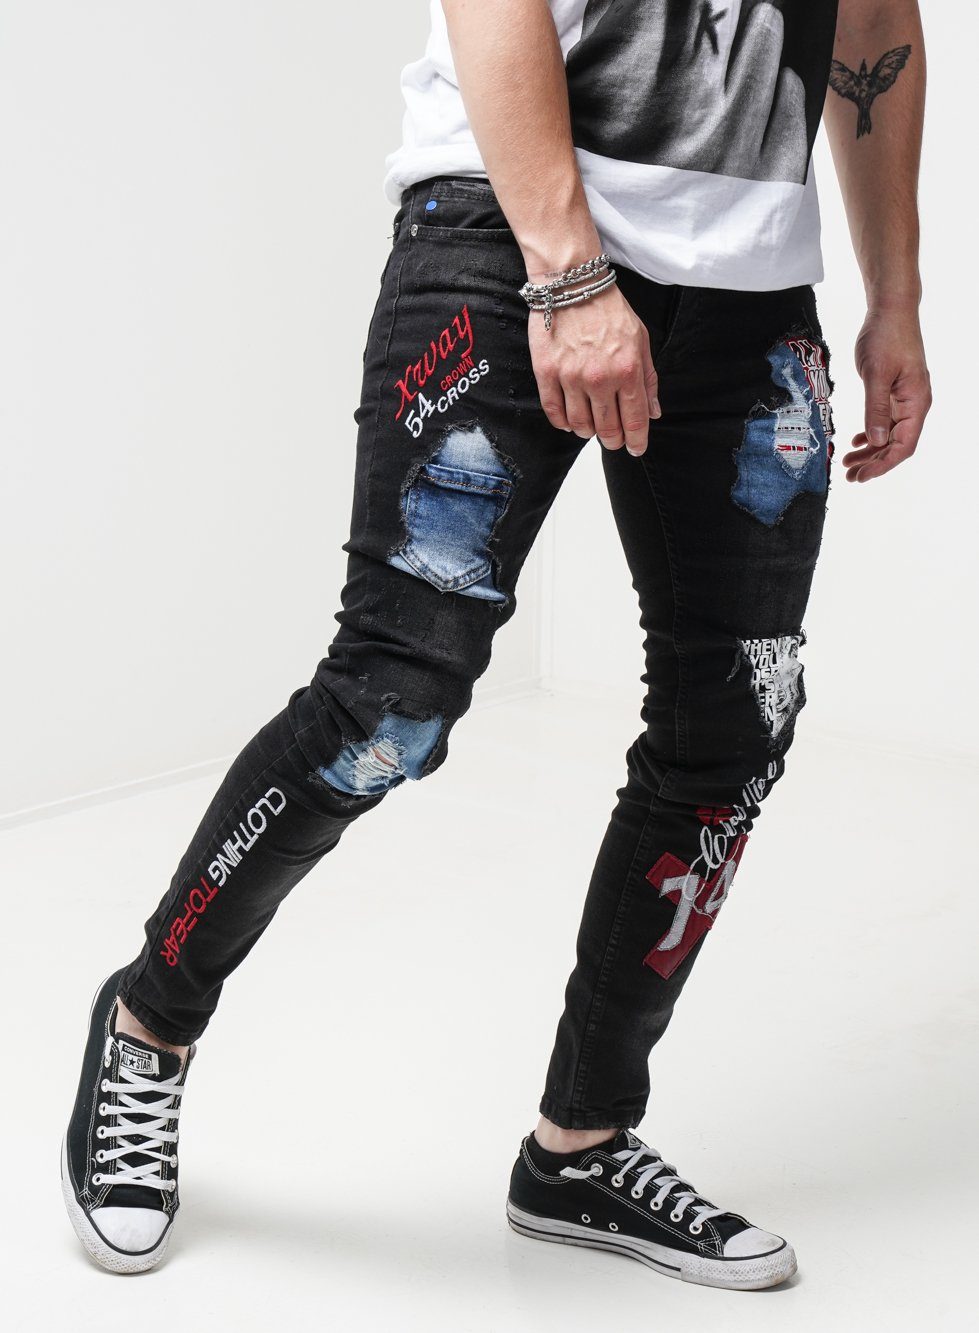 A man donning INSIDER skinny ripped jeans in a t-shirt, showcasing mens streetwear style.